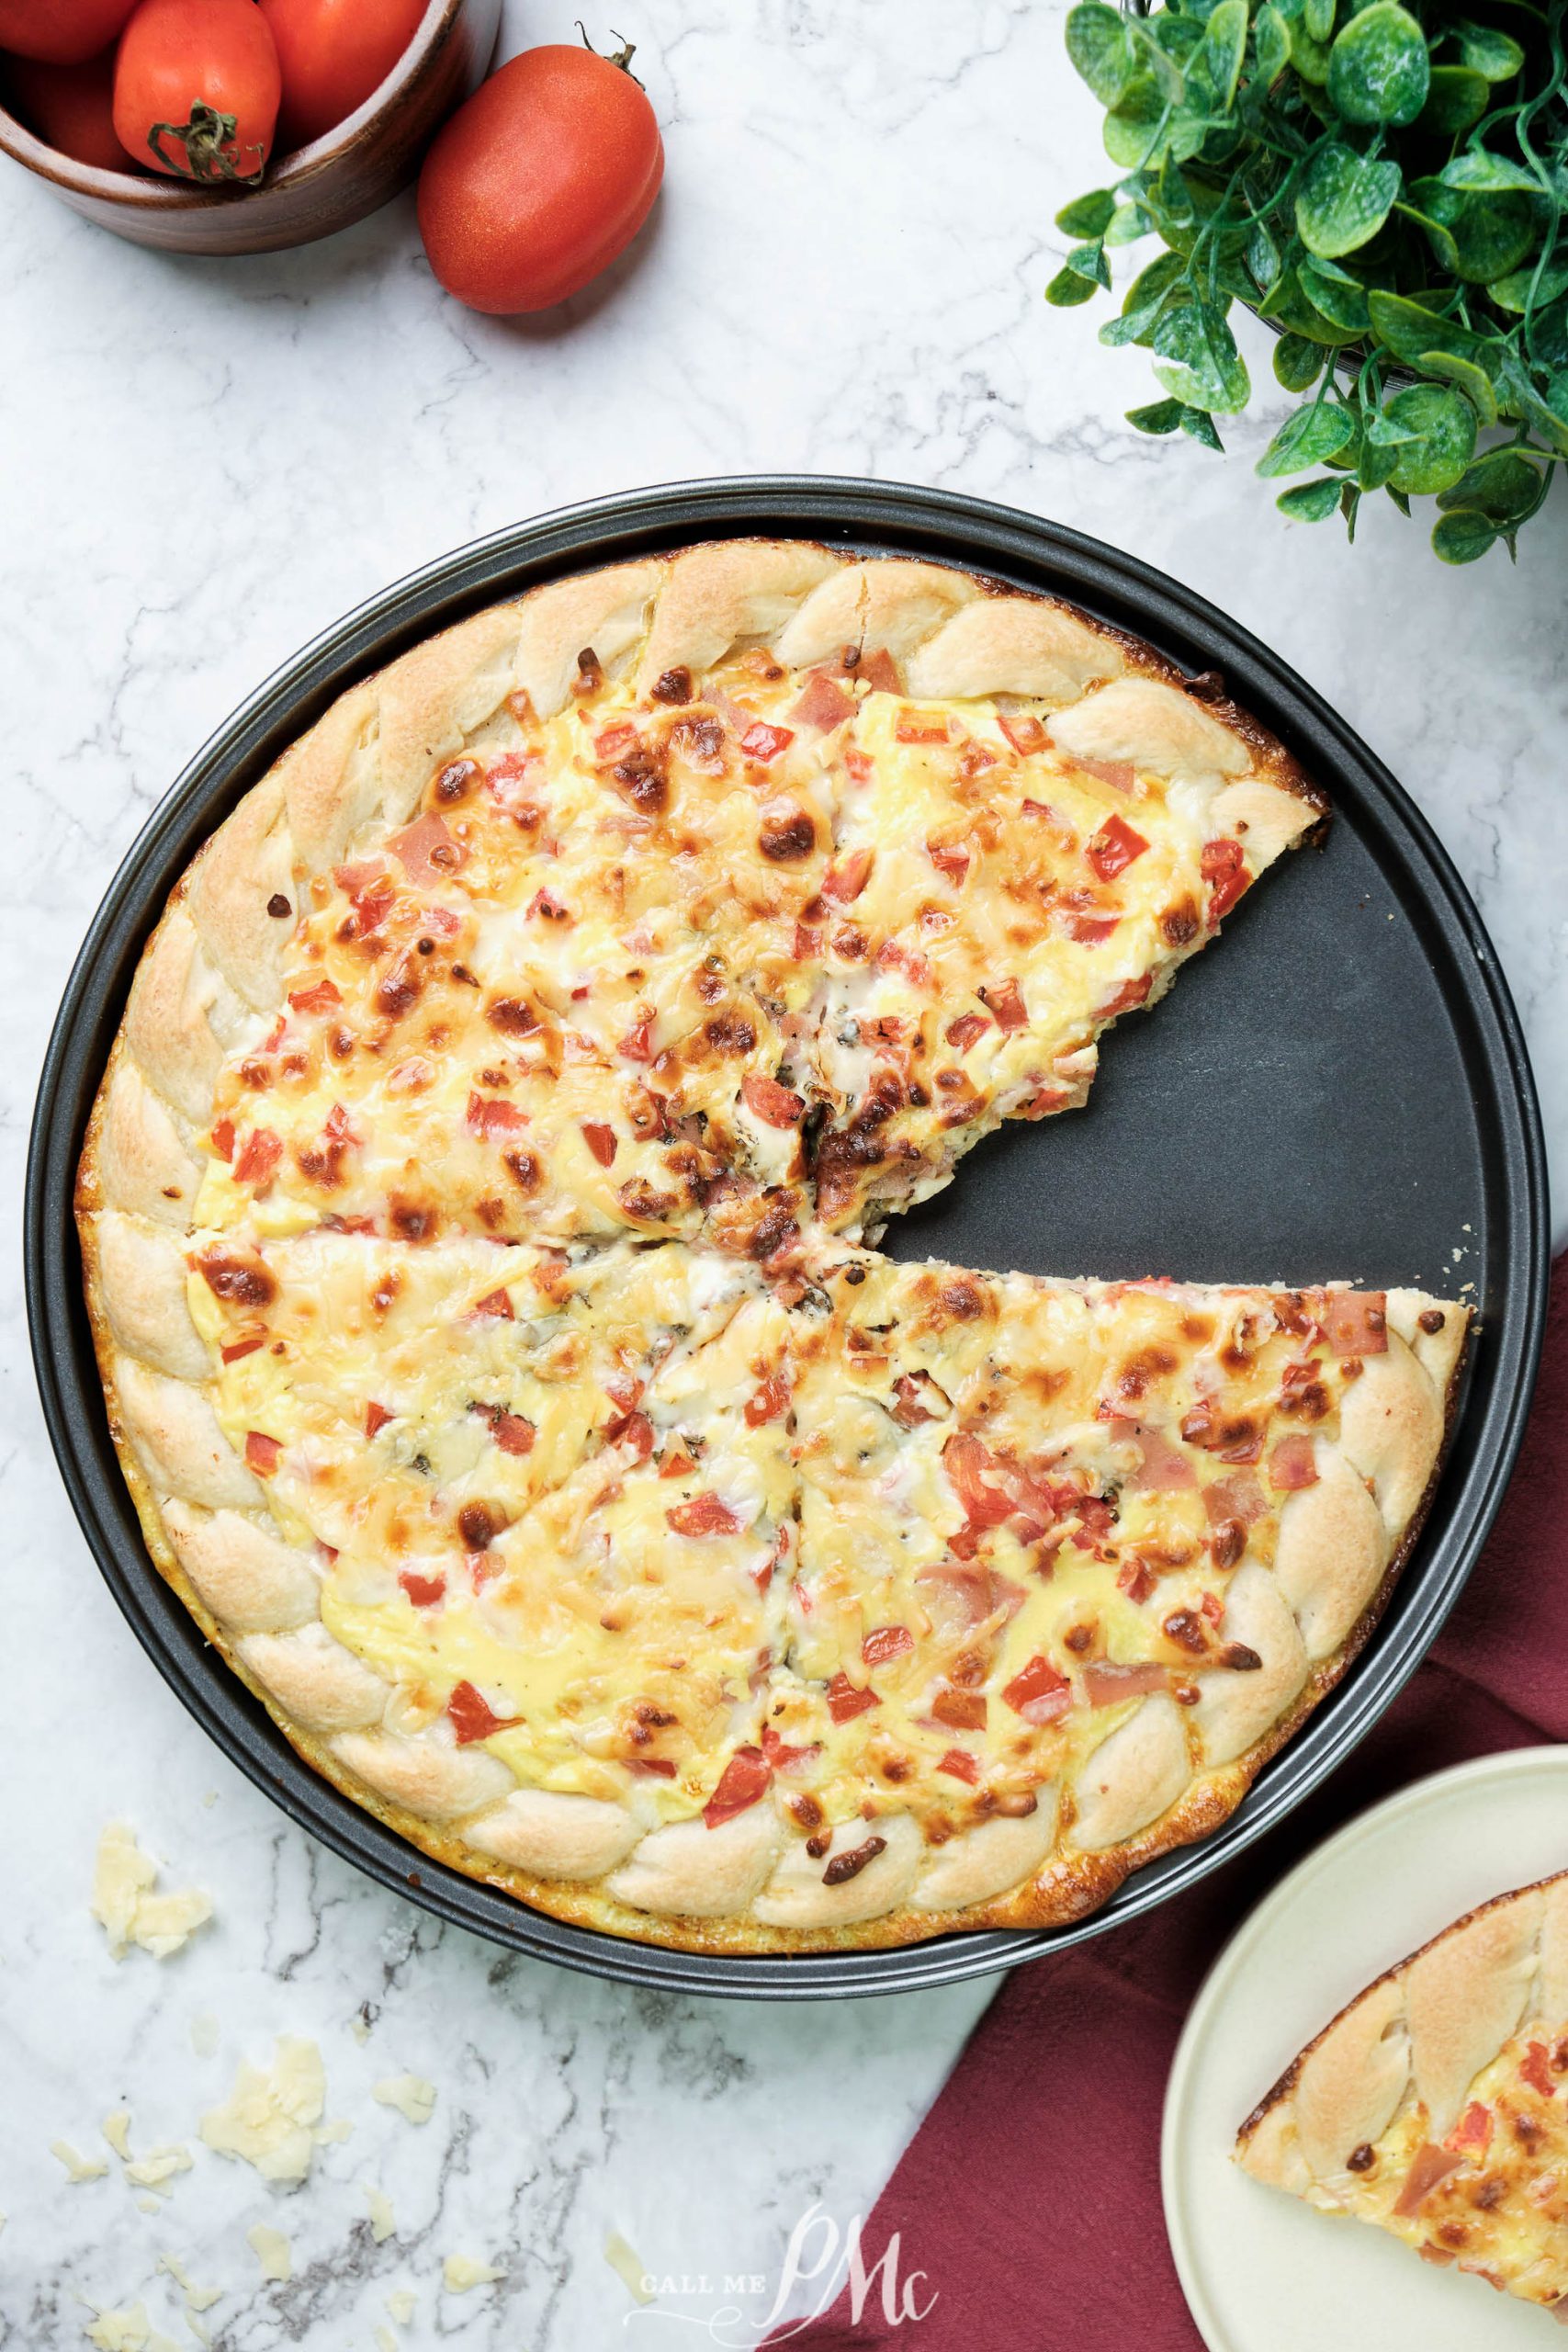 This Cheddar Ham Breakfast Pizza recipe has eggs, cheese, and ham baked into a thick, chewy, store-bought crust! It checks all the boxes for speed, budget, and flavor.